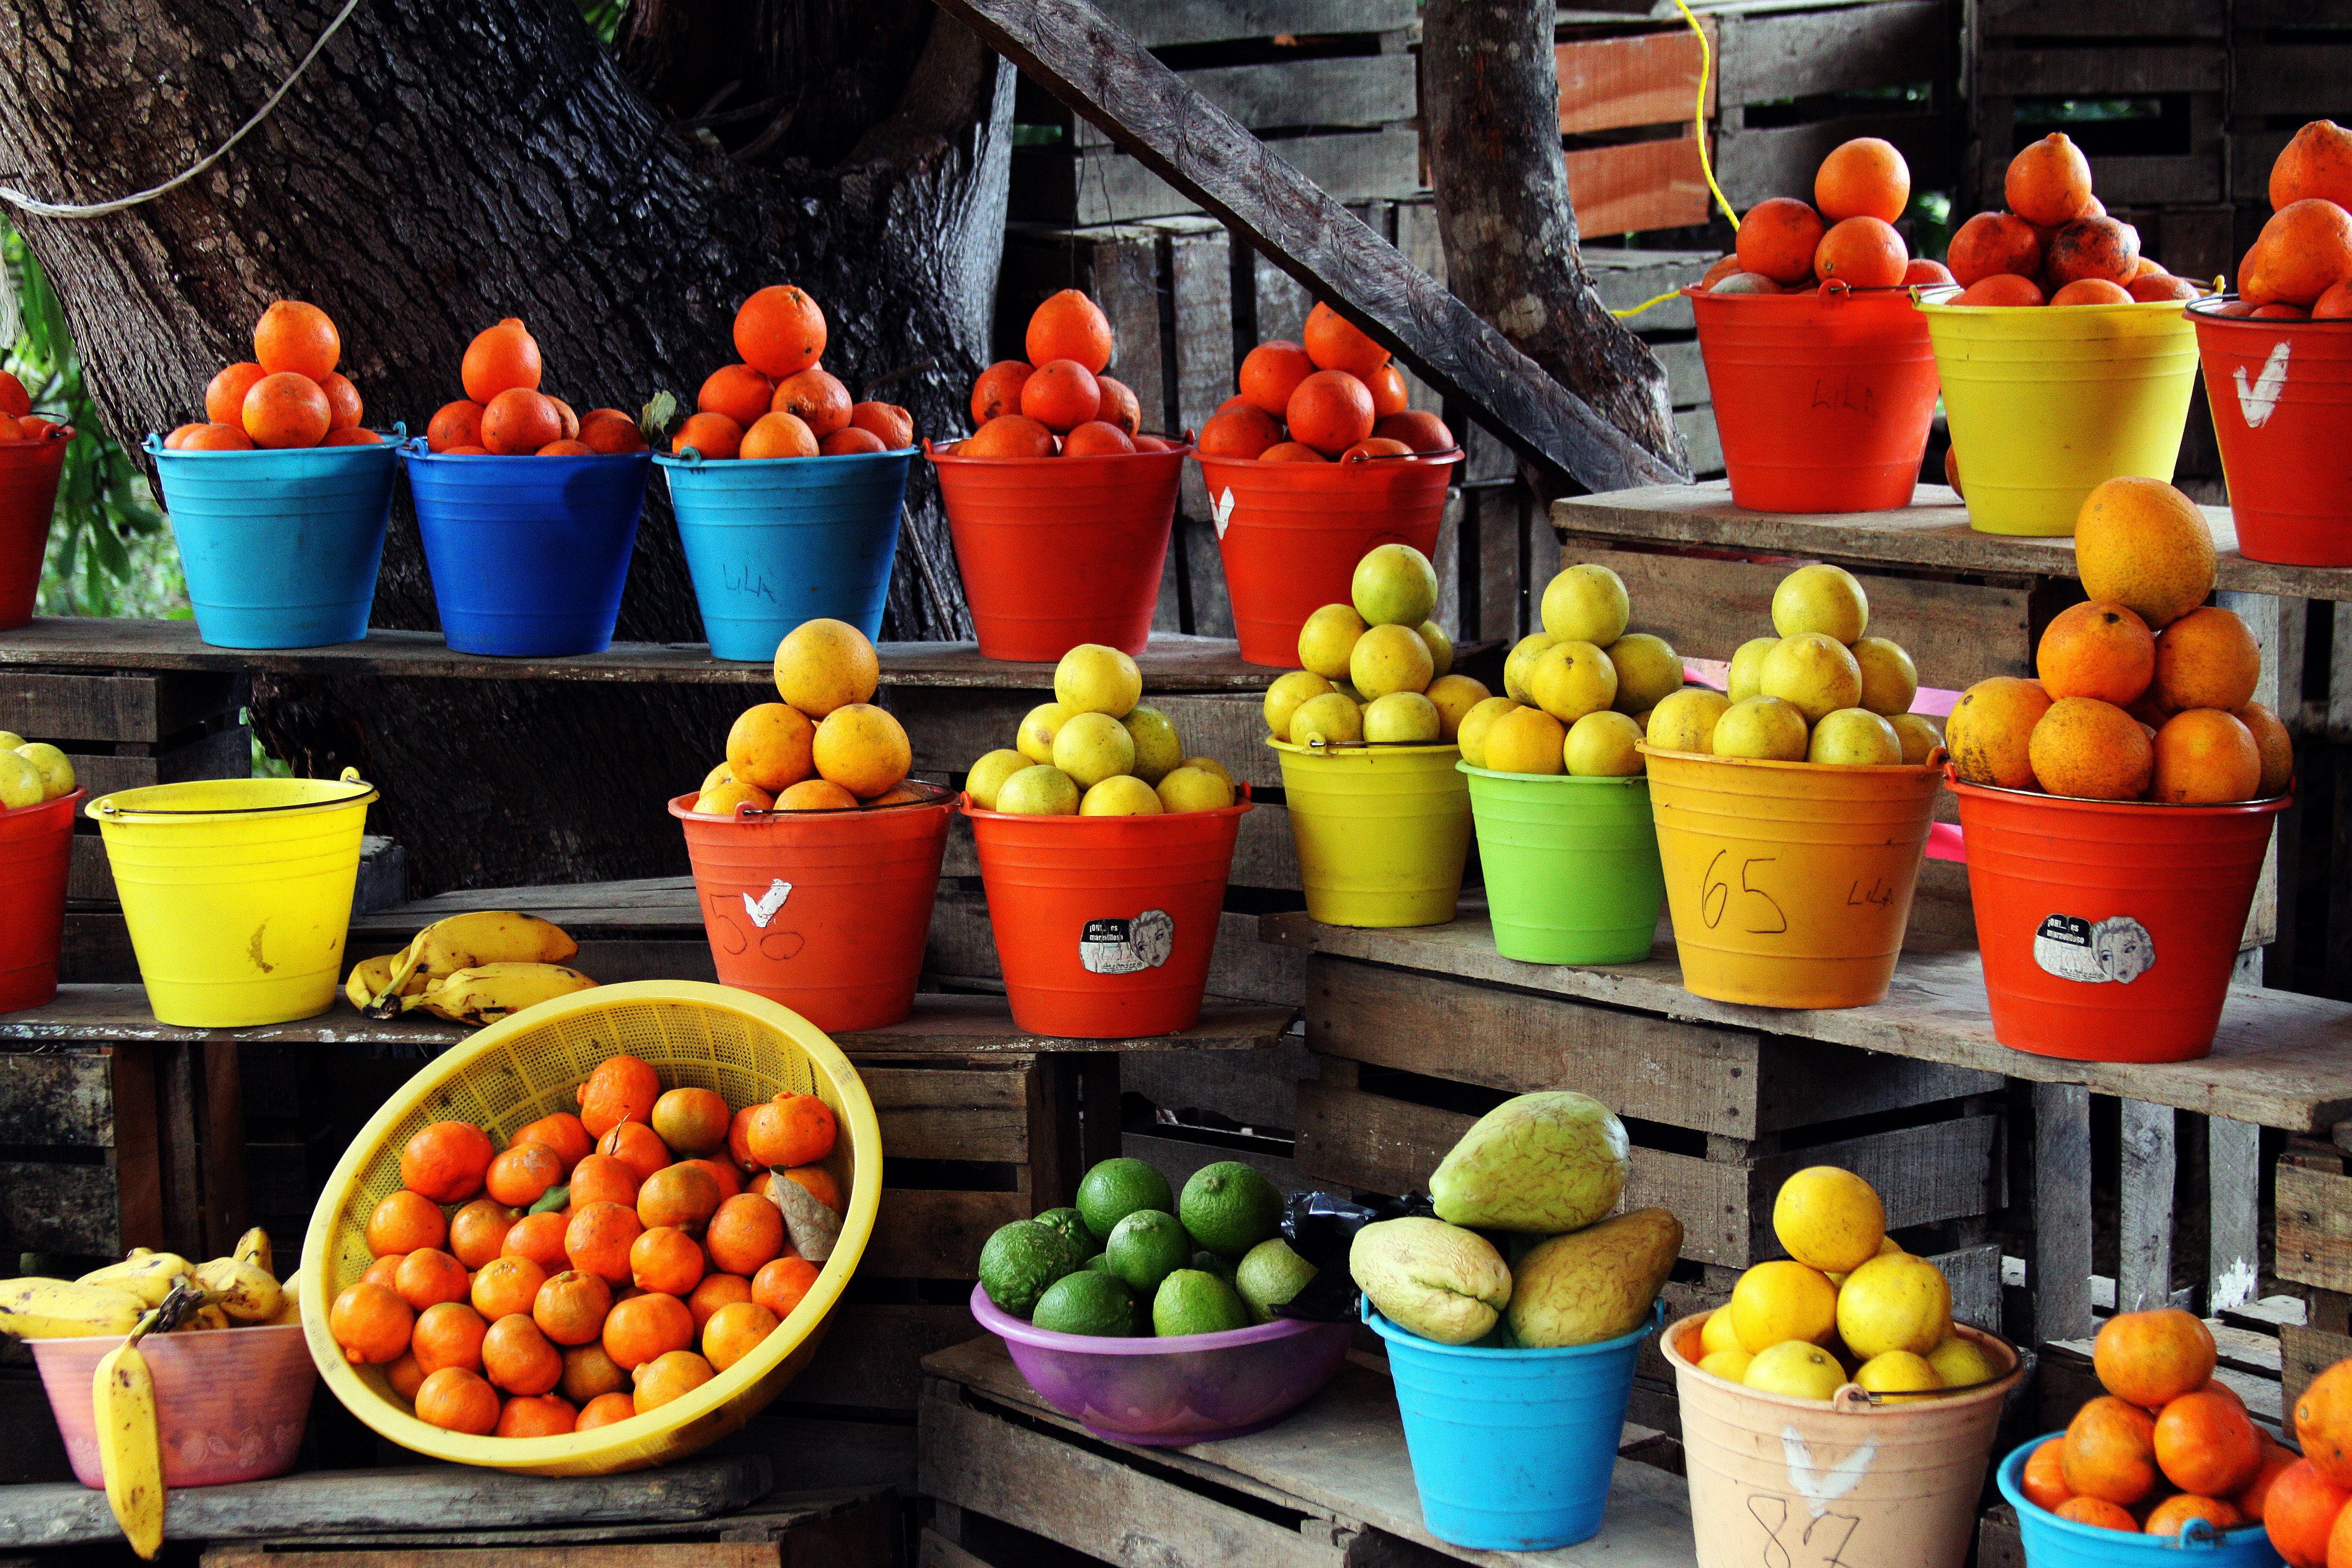 File:Tepic fruit stand.jpg - Wikimedia Commons